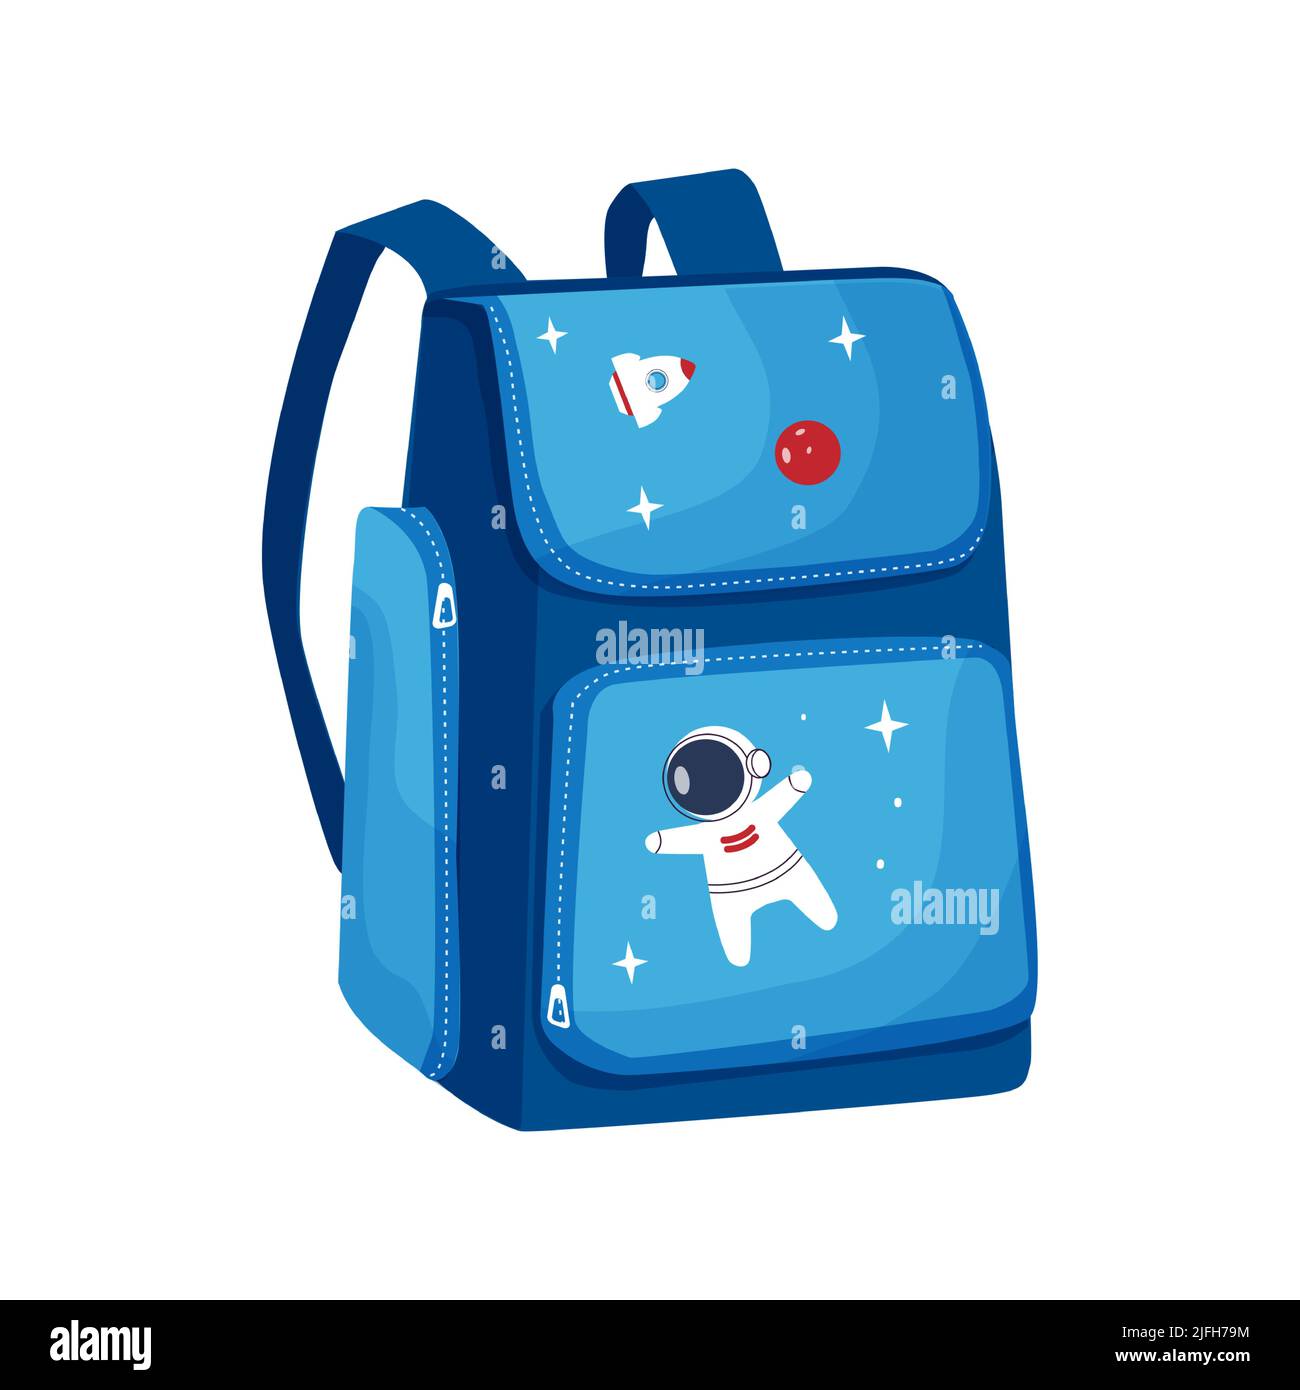 Colorful schoolbag flat icon. Blue Backpack with astronaut and rocket image, zippers isolated on white background. Vector illustration. Stock Vector